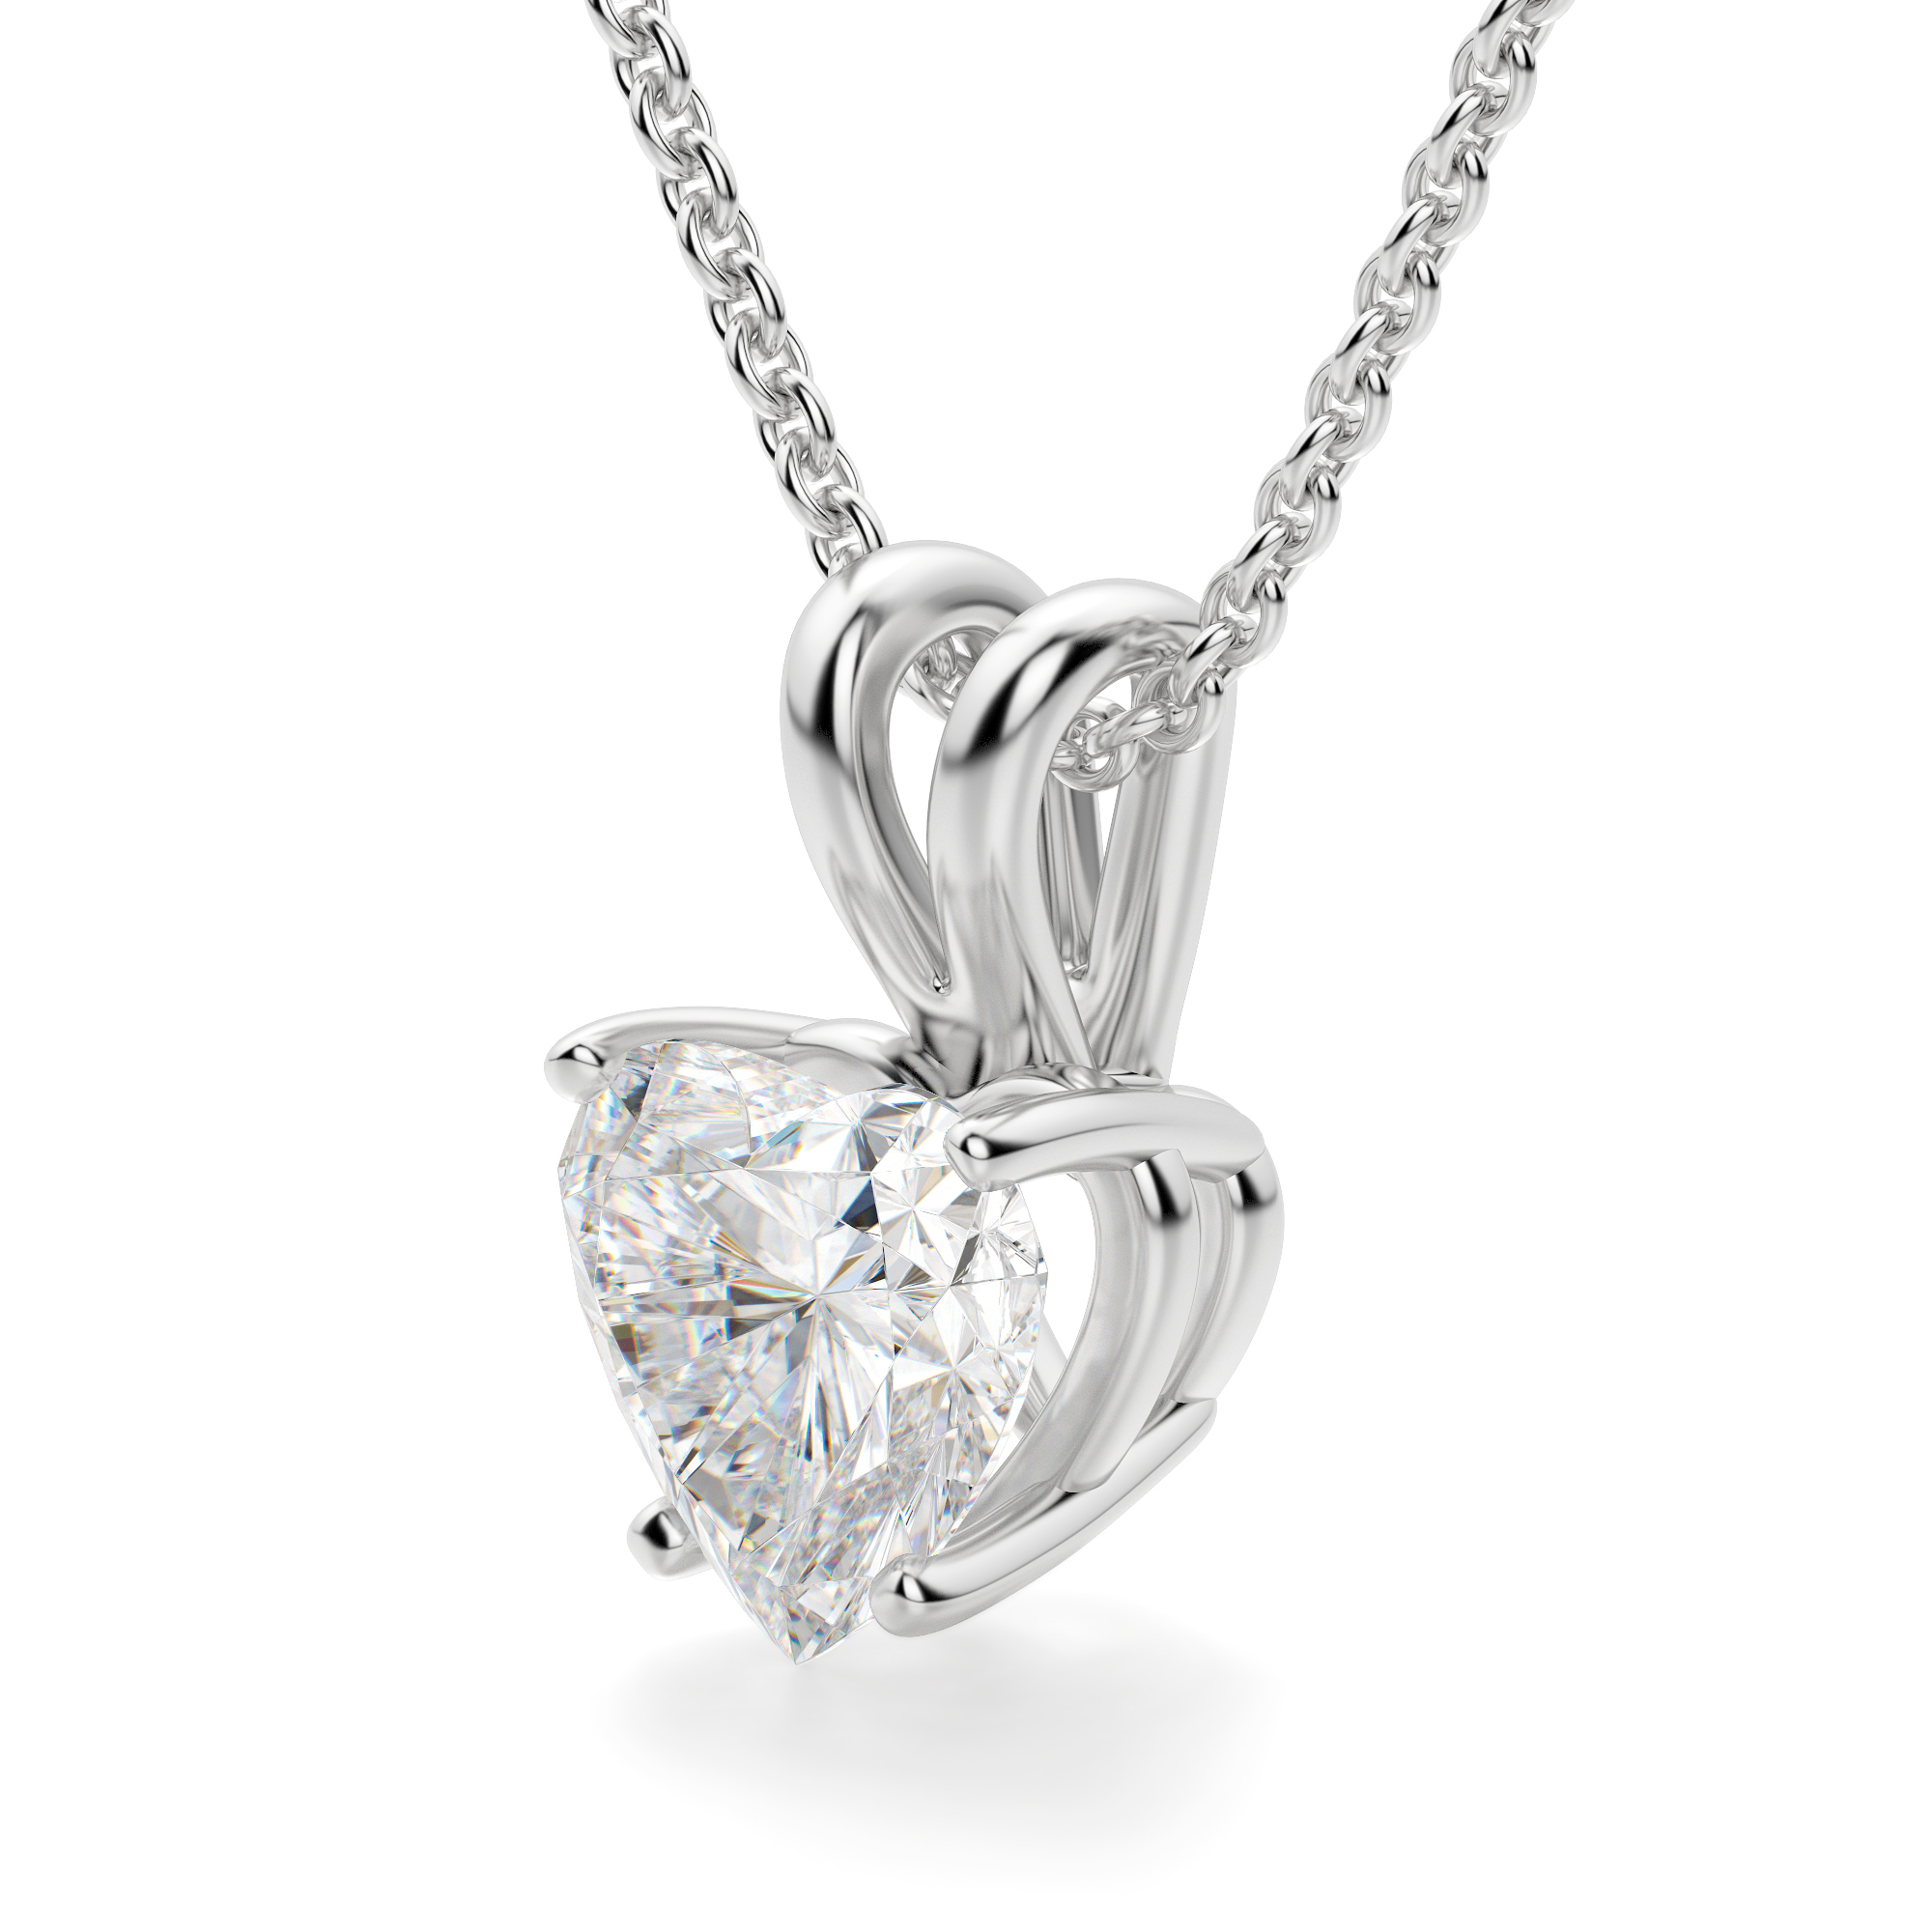 Heart Cut Basket Set Pendant with Sterling Silver Cable Chain